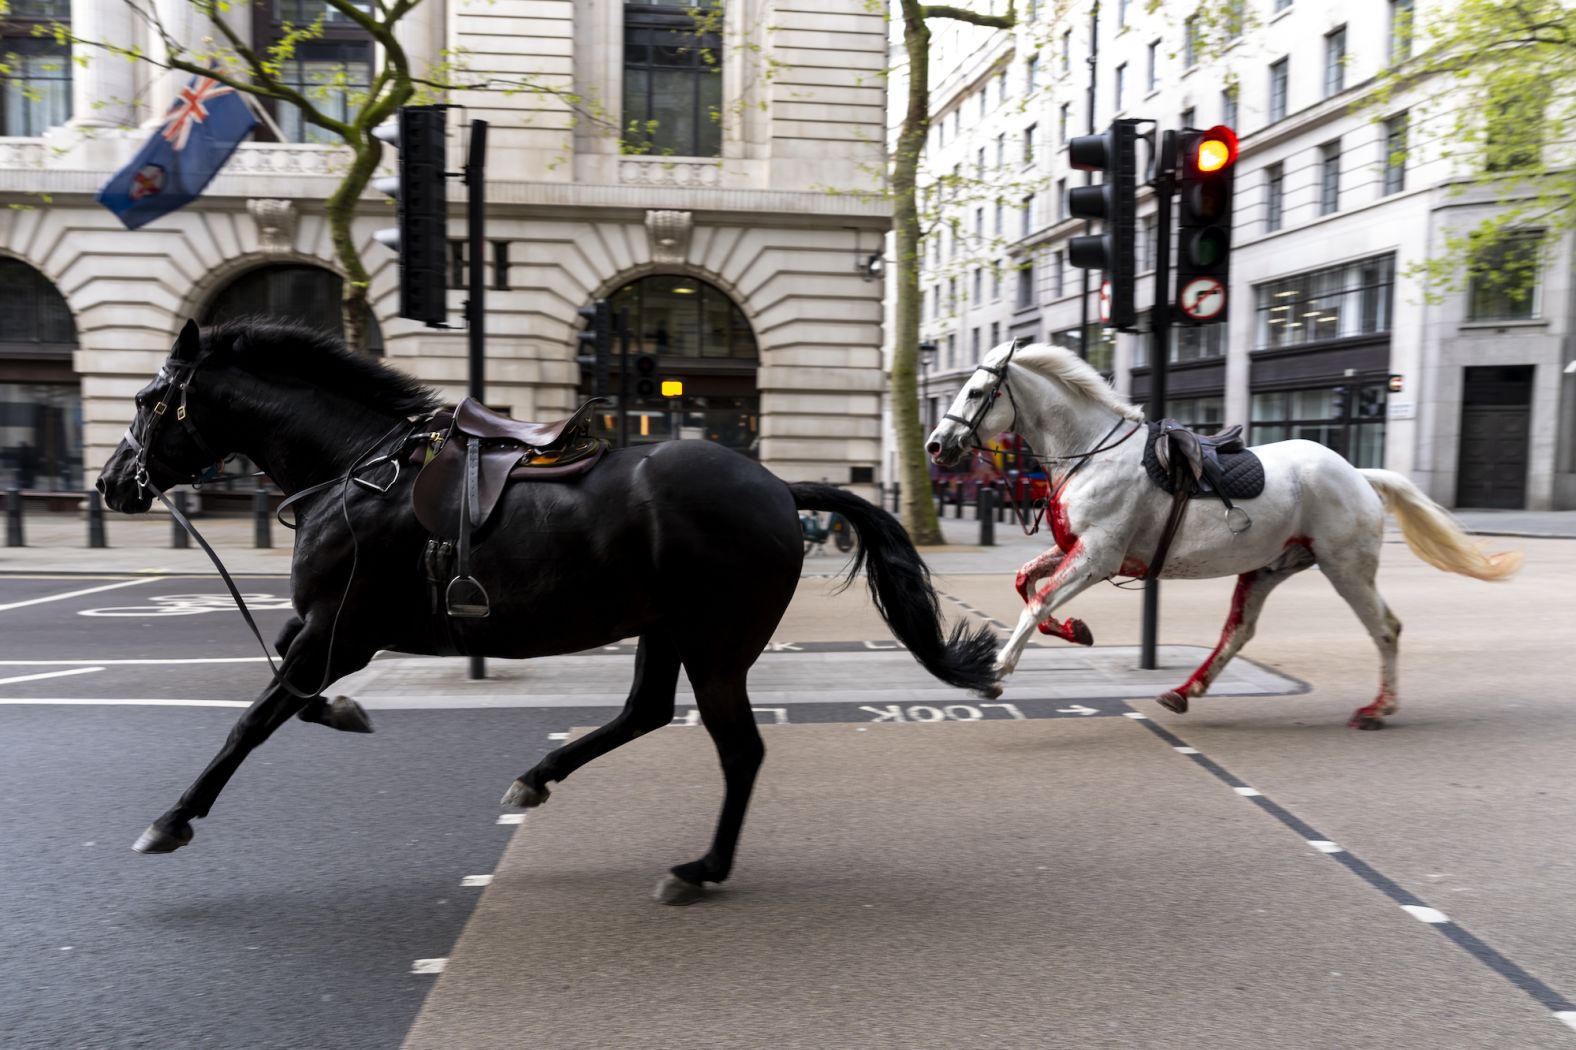 Two Household Cavalry horses run through the streets of London after <a href="https://www.cnn.com/2024/04/25/uk/london-escaped-horses-condition-gbr-scli-intl/index.html" target="_blank">breaking free</a> on Wednesday, April 24. Six soldiers and seven horses were taking part in an exercise that morning when the animals became spooked after some concrete fell off a conveyor belt being used in nearby construction work and hit the ground, according to the British Army. The army said in an update on X on Thursday that five horses tried to bolt and four broke loose. They were recovered, but two are in "a serious condition," a British government minister said.